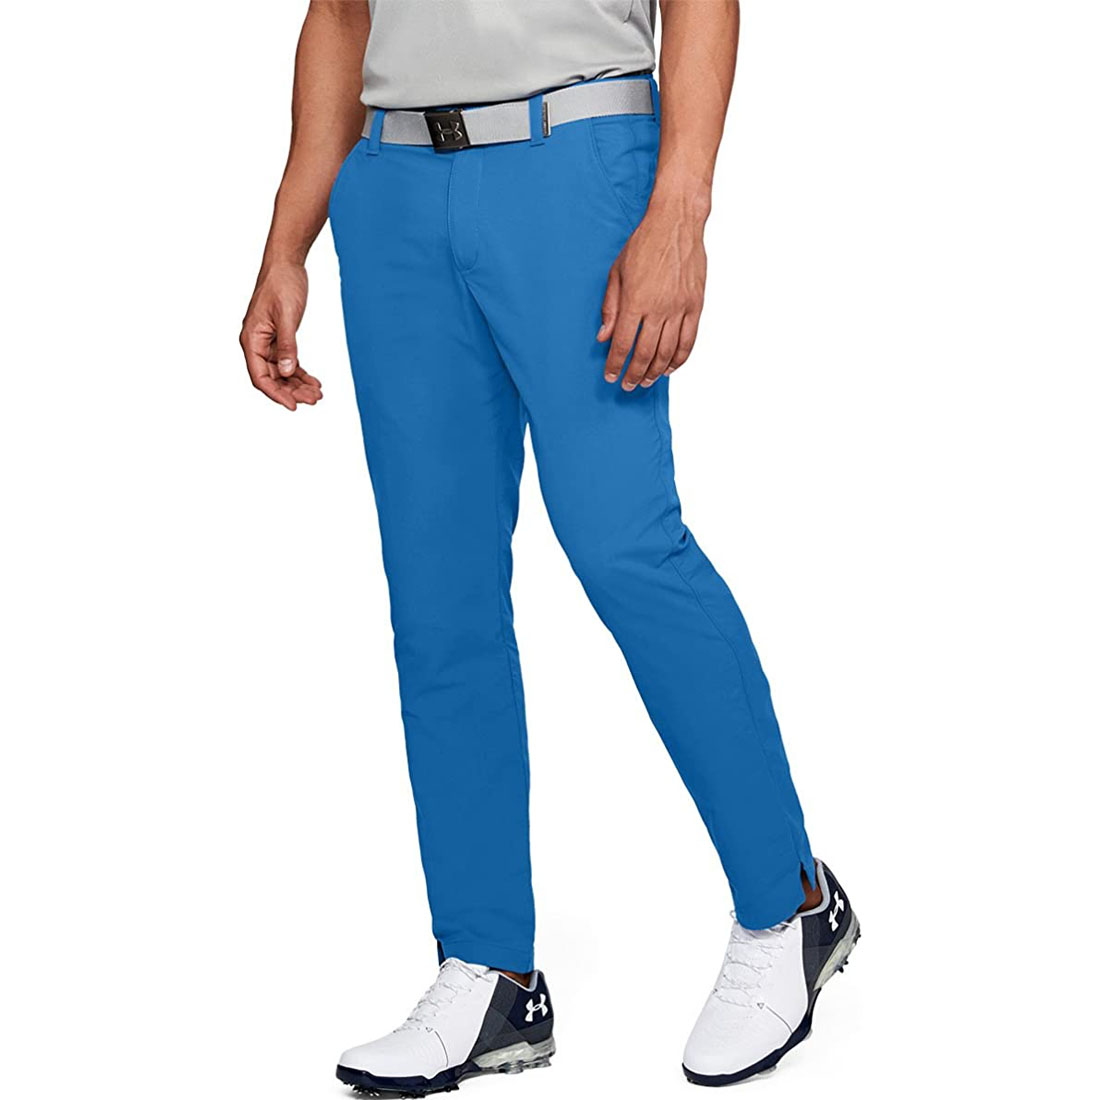 Under Armour Men's Match Play Golf Pants Tapered Blue True Ink